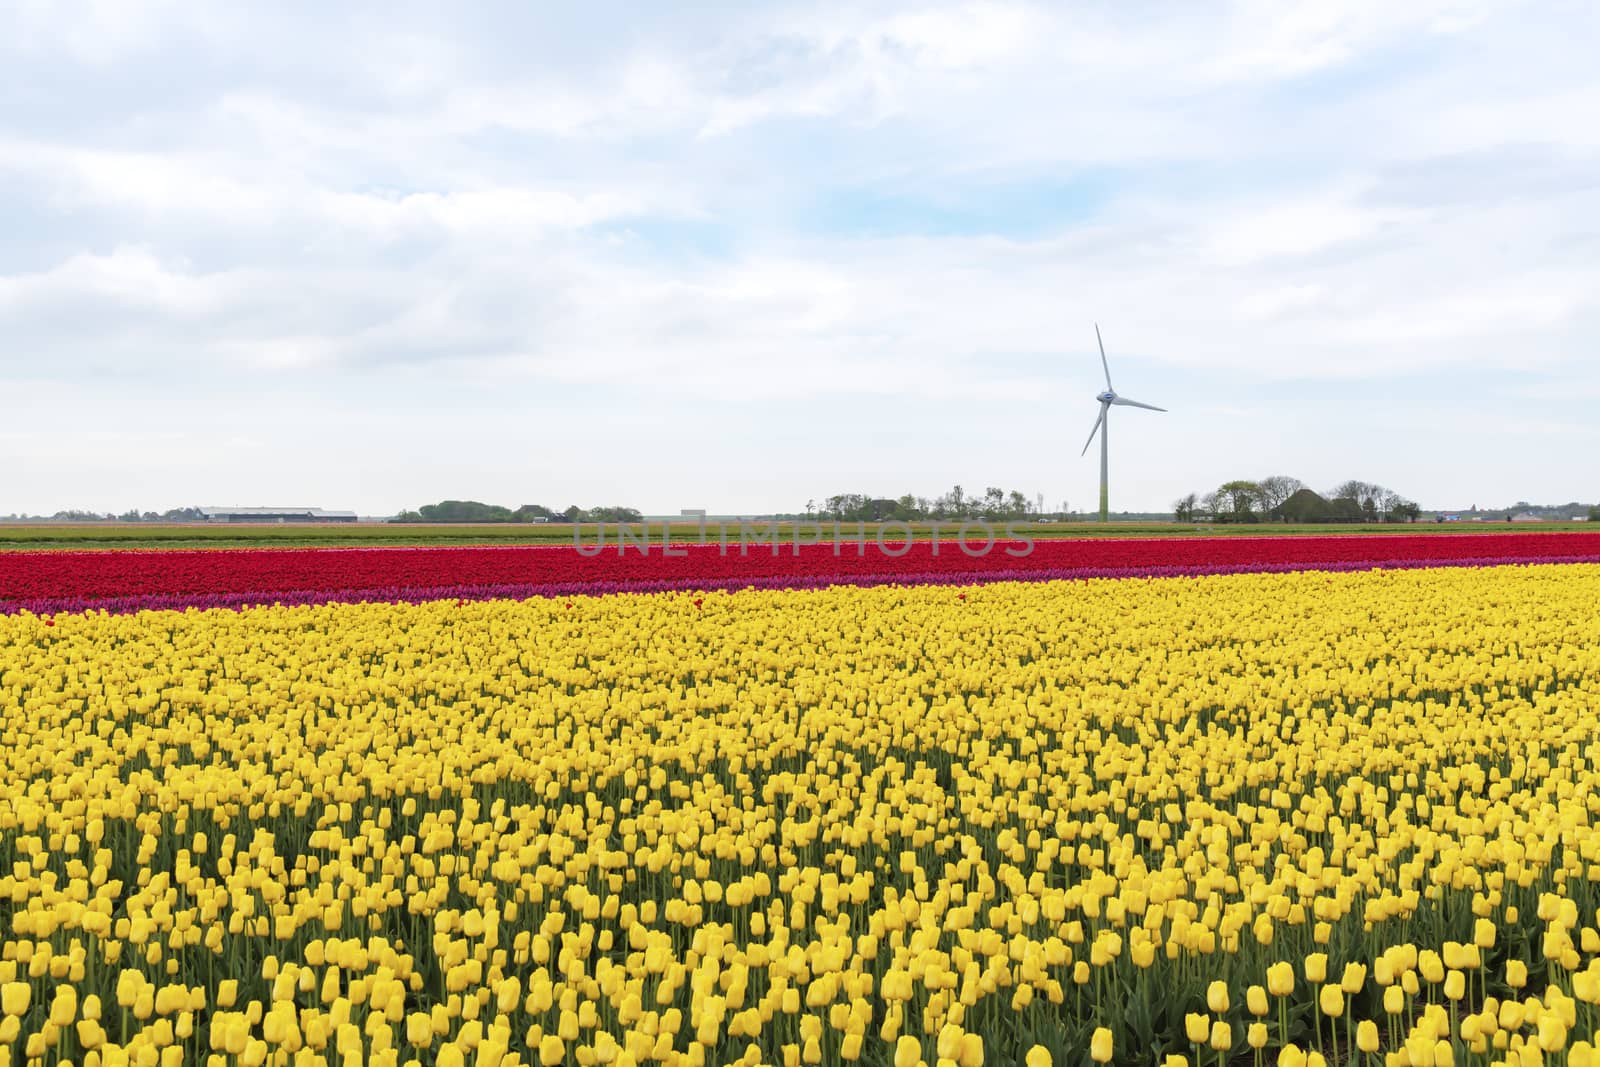 Dutch rural landscape with yellow and red tulips bulb farm field and wind turbine in the background